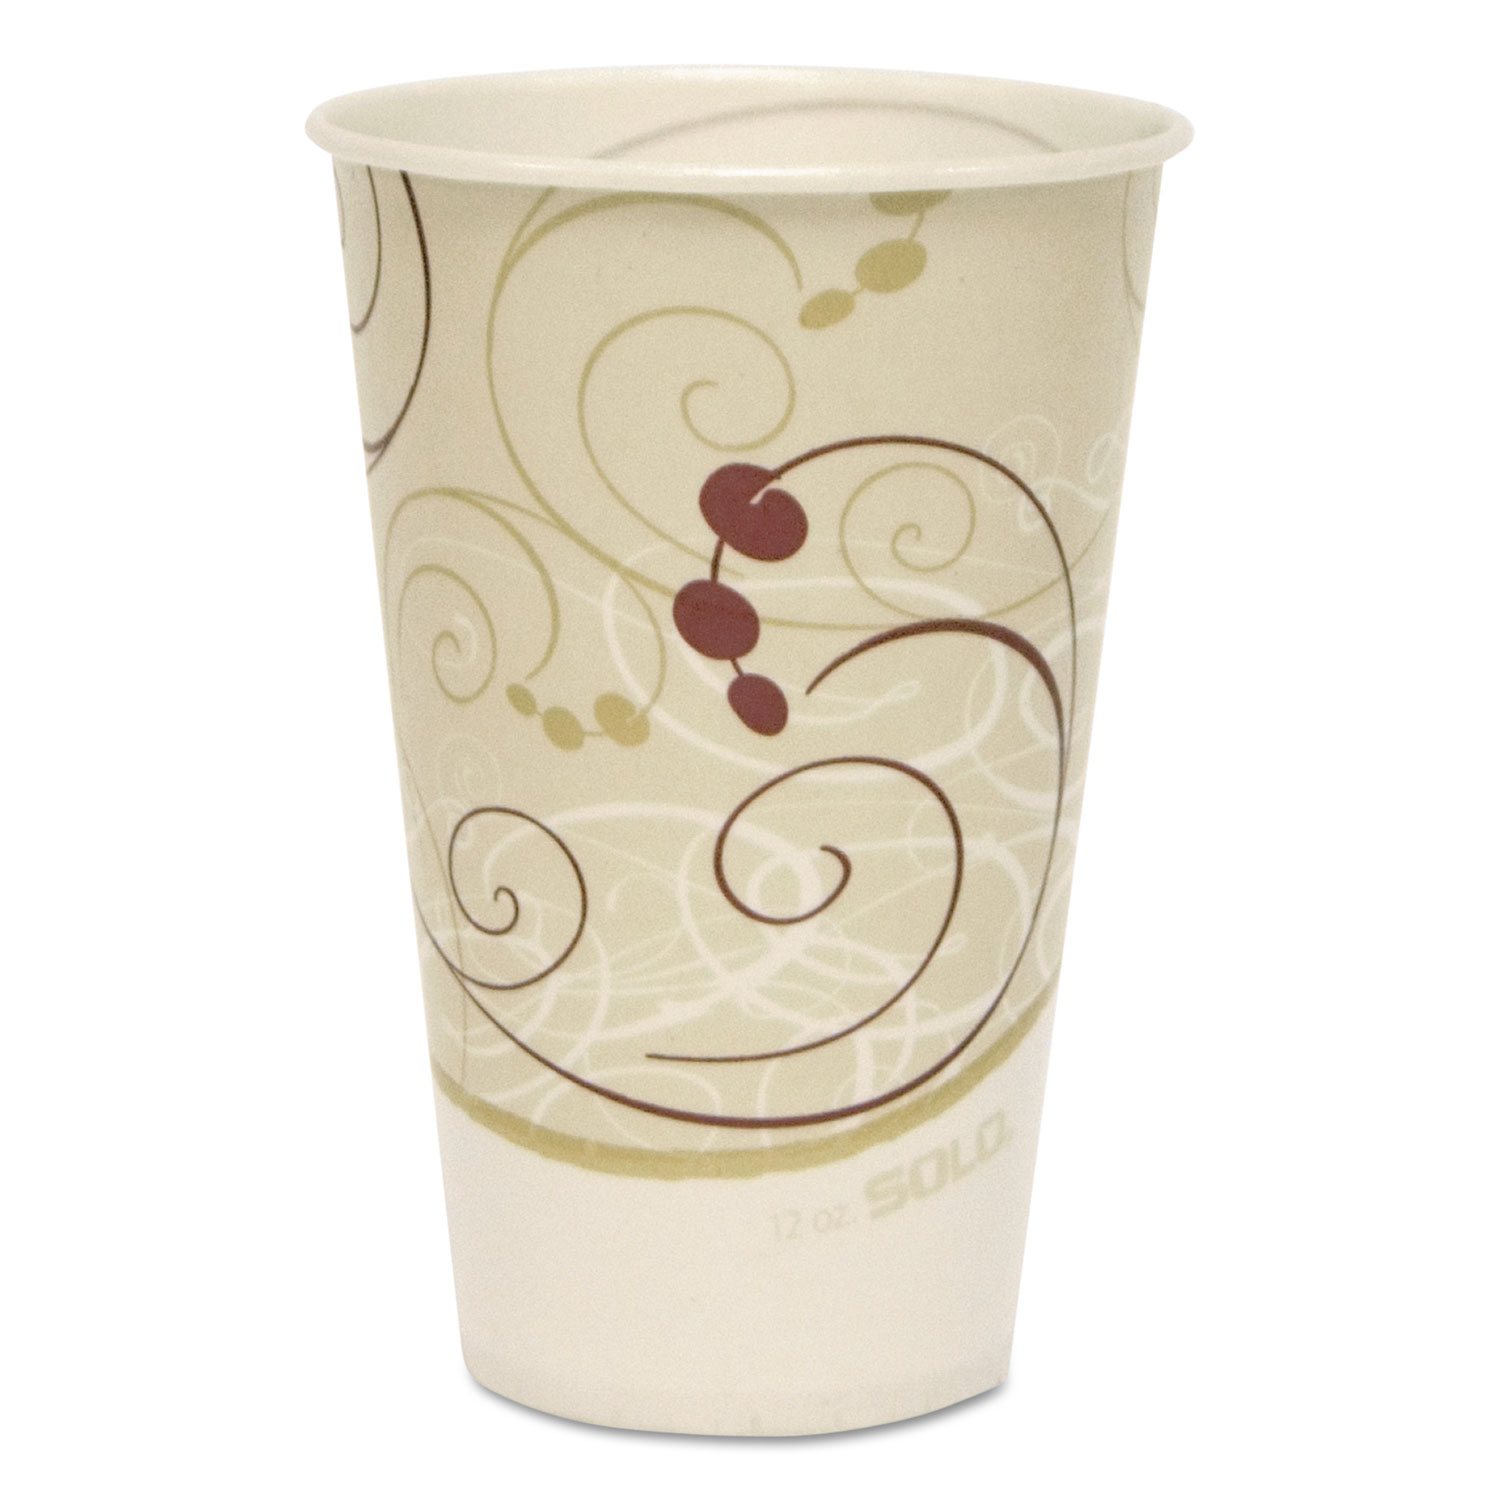  Dart R12N-J8000 Symphony Treated-Paper Cold Cups, 12oz, White/Beige/Red, 100/Bag, 20 Bags/Carton (SCCR12NSYM) 